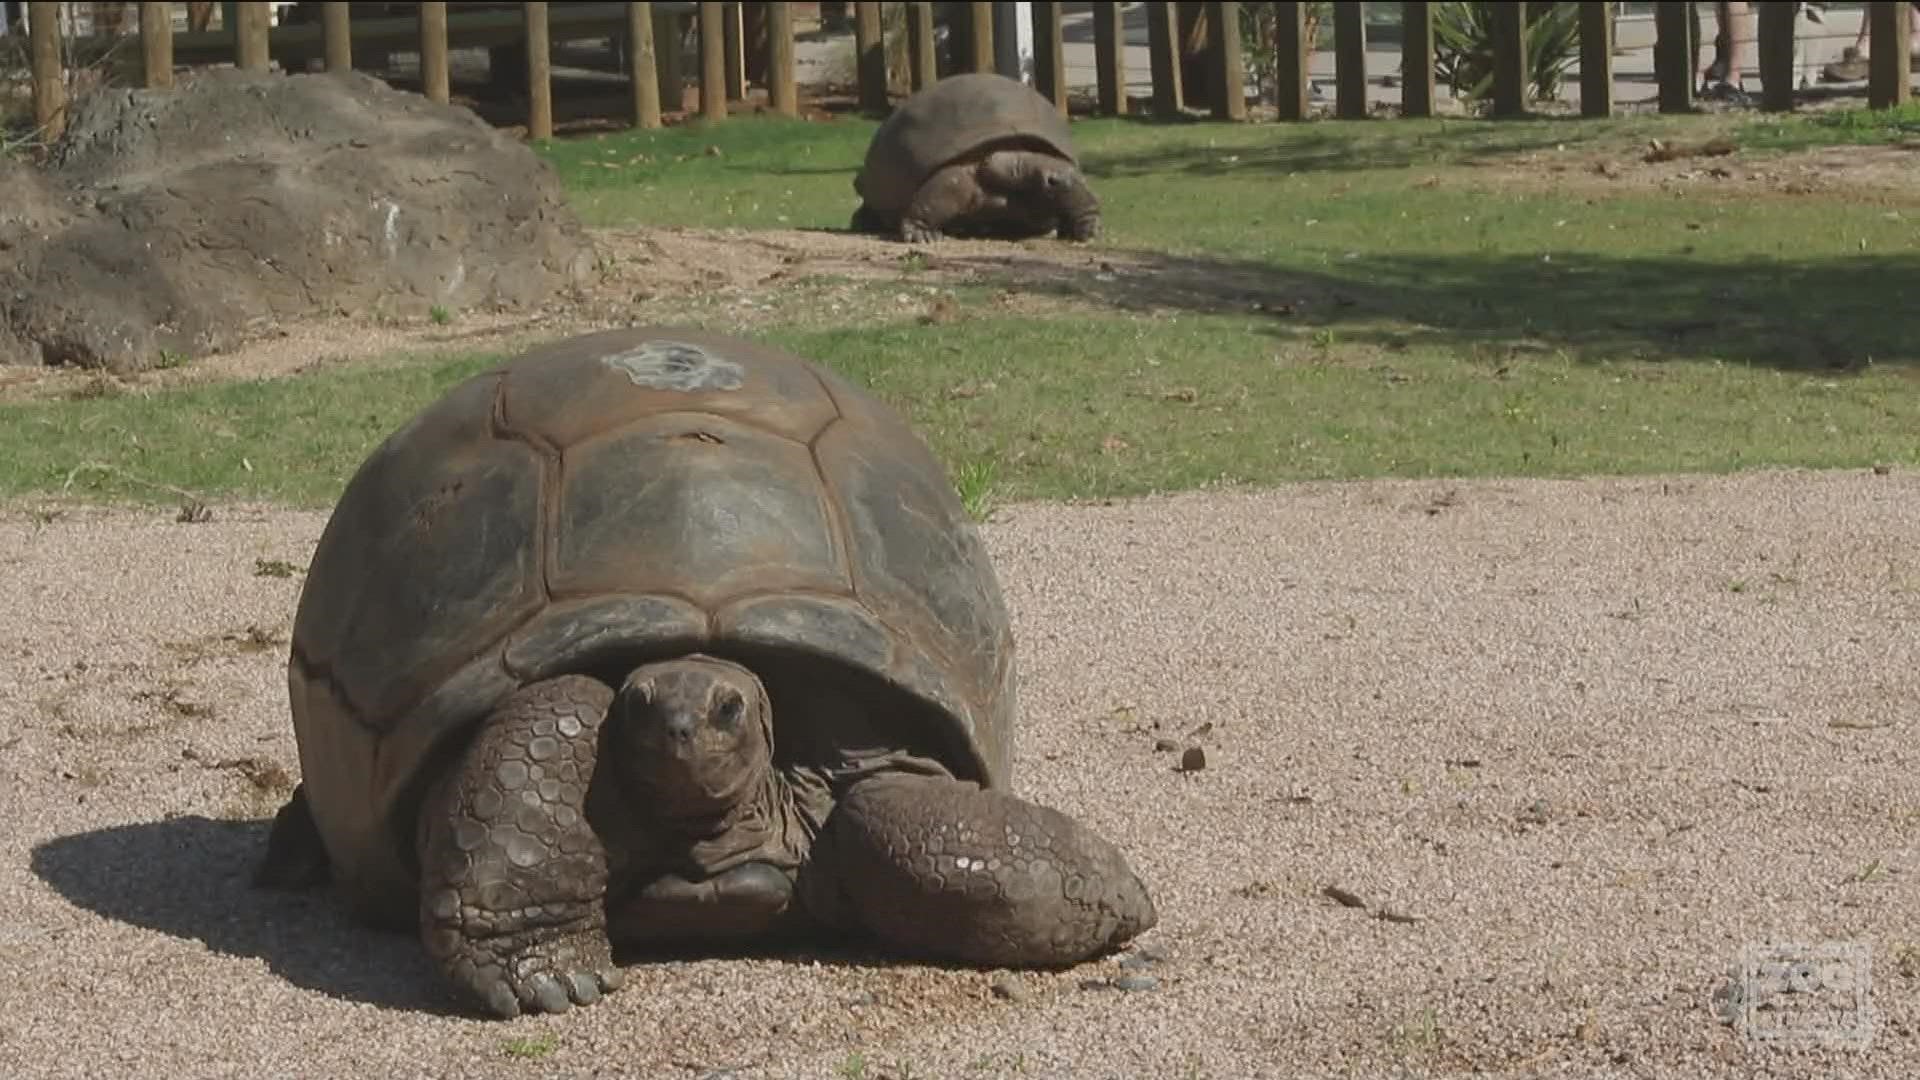 The giant tortoise was estimated to have been in her 70s to 80s at the time of her passing.